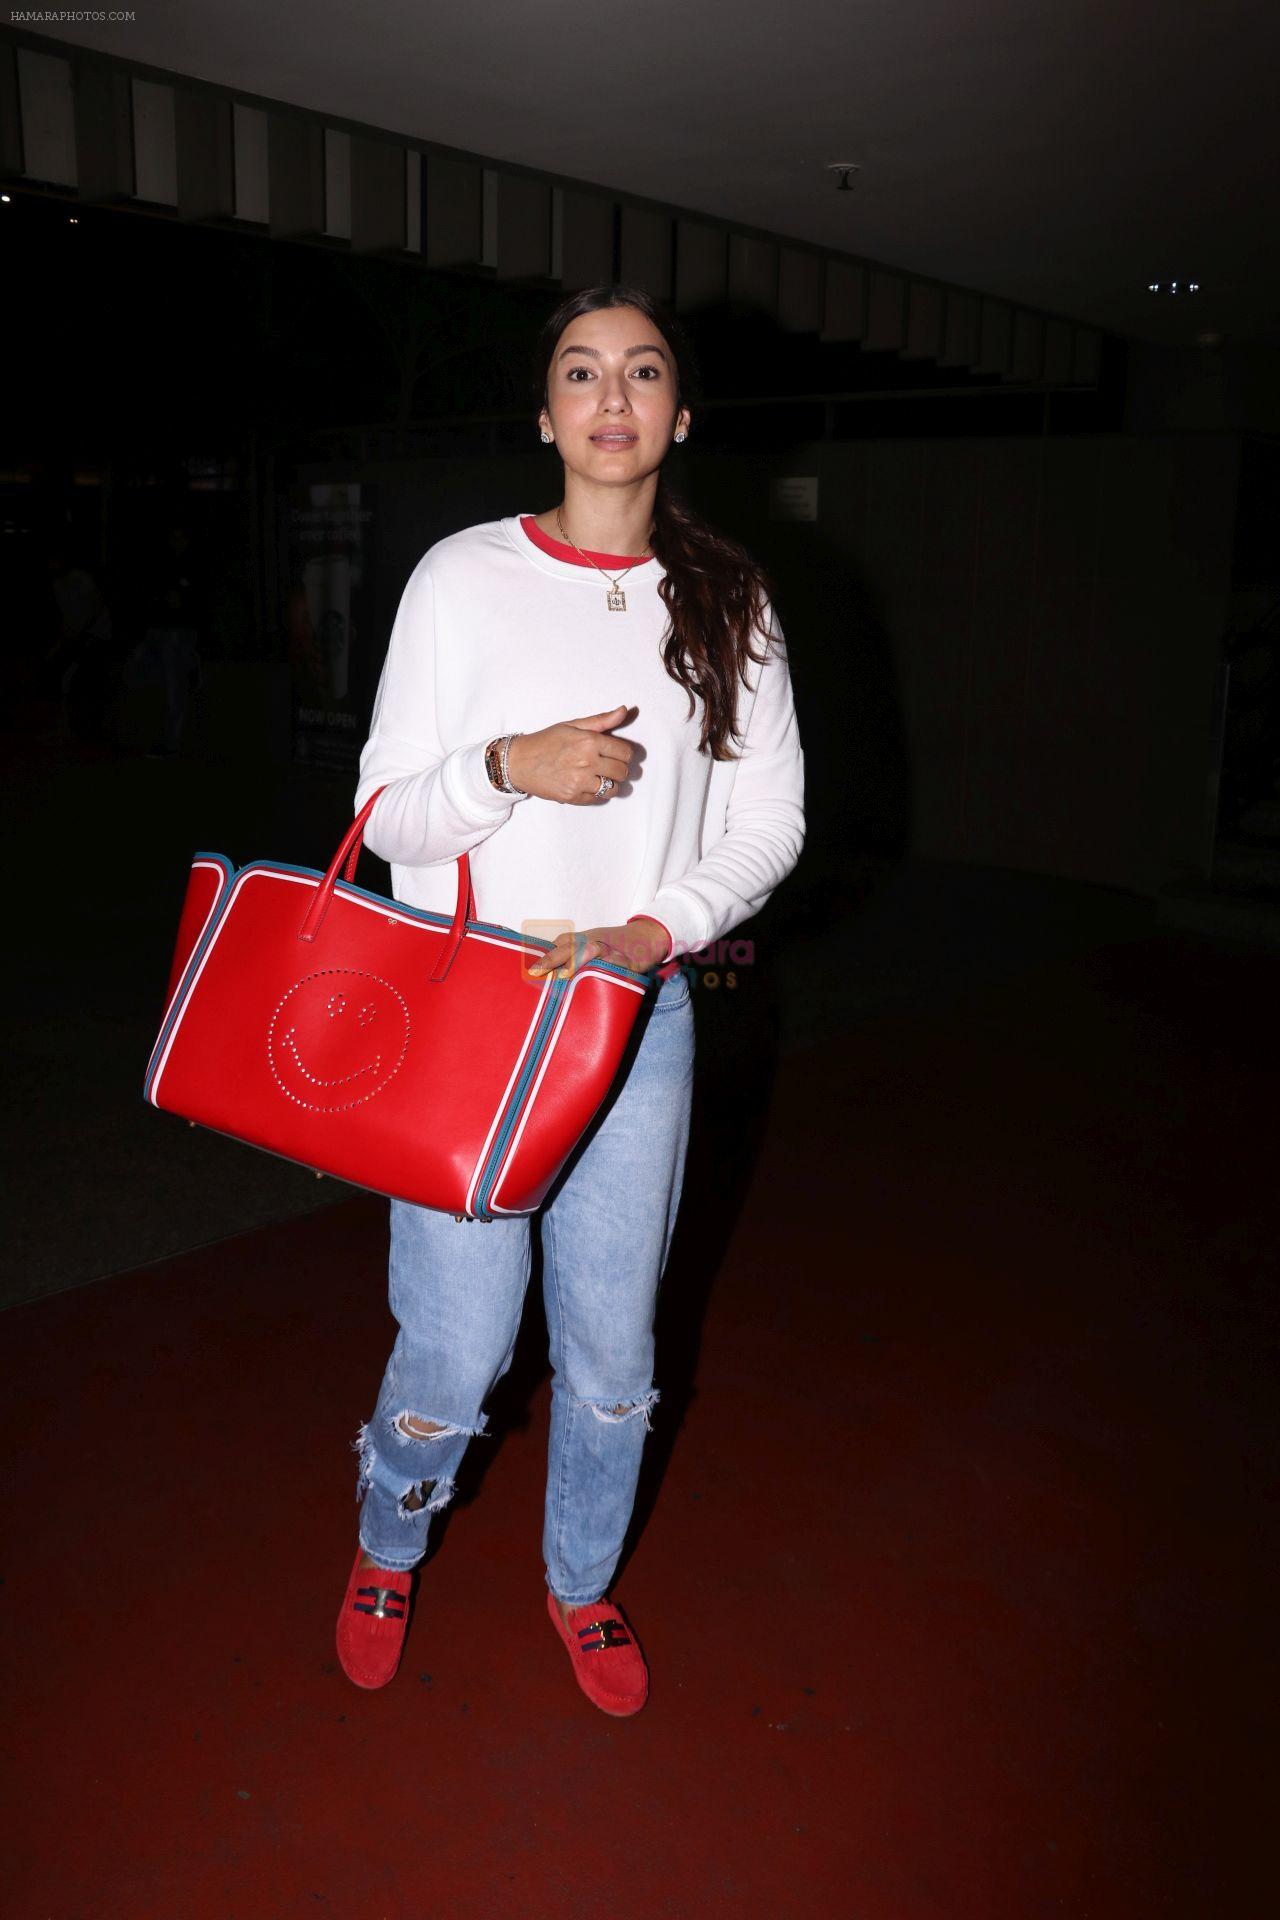 Gauhar Khan Spotted At Airport on 20th July 2017